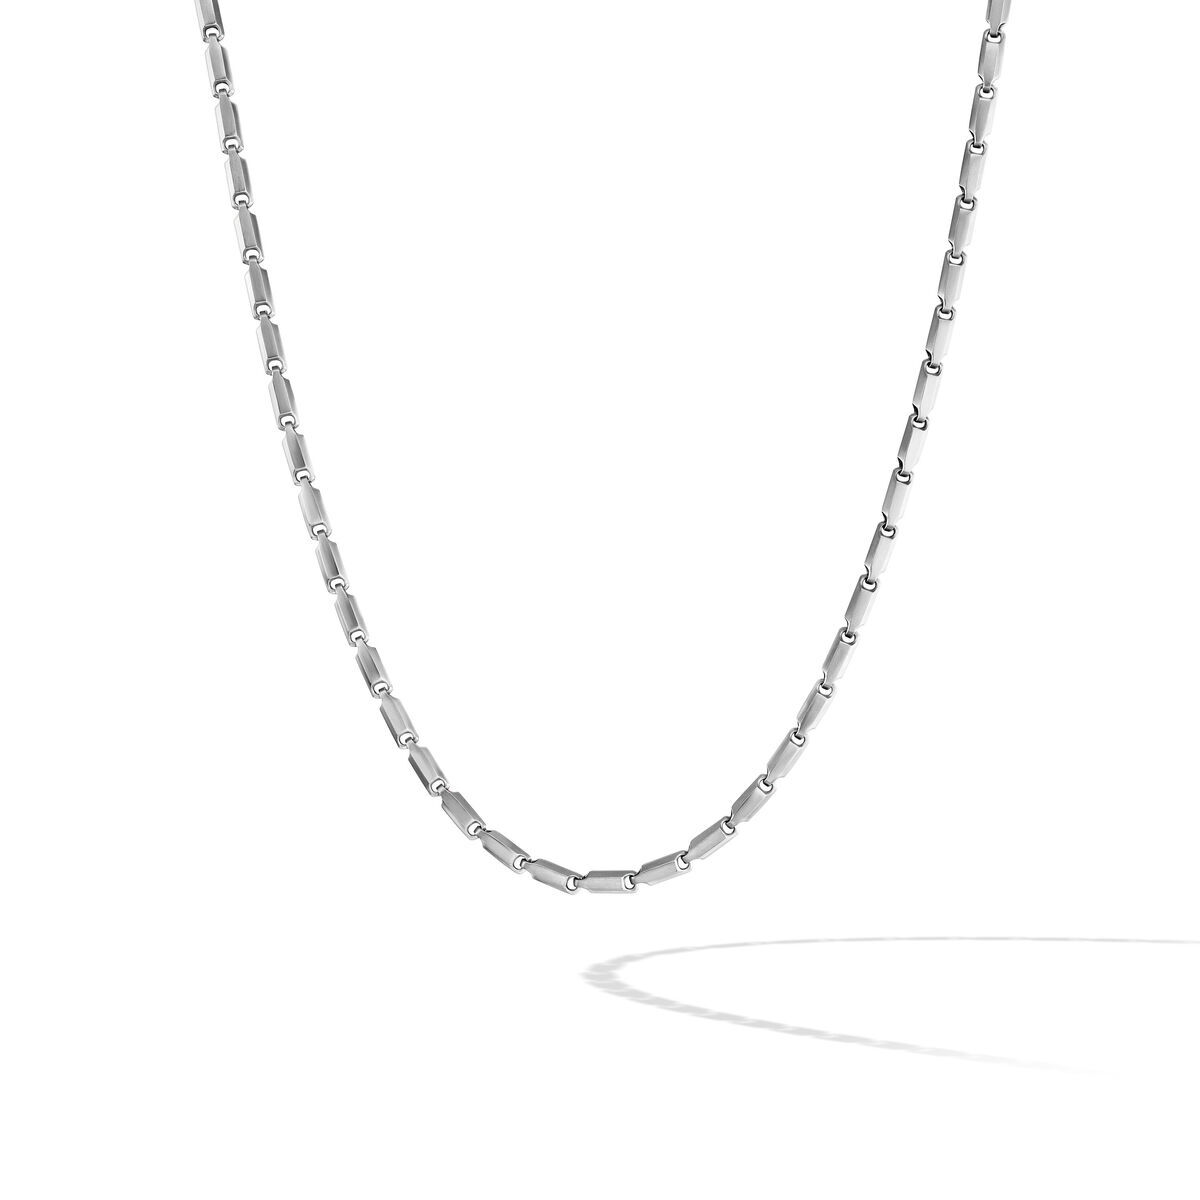 Men's David Yurman Faceted Link Necklace - 22 Inches